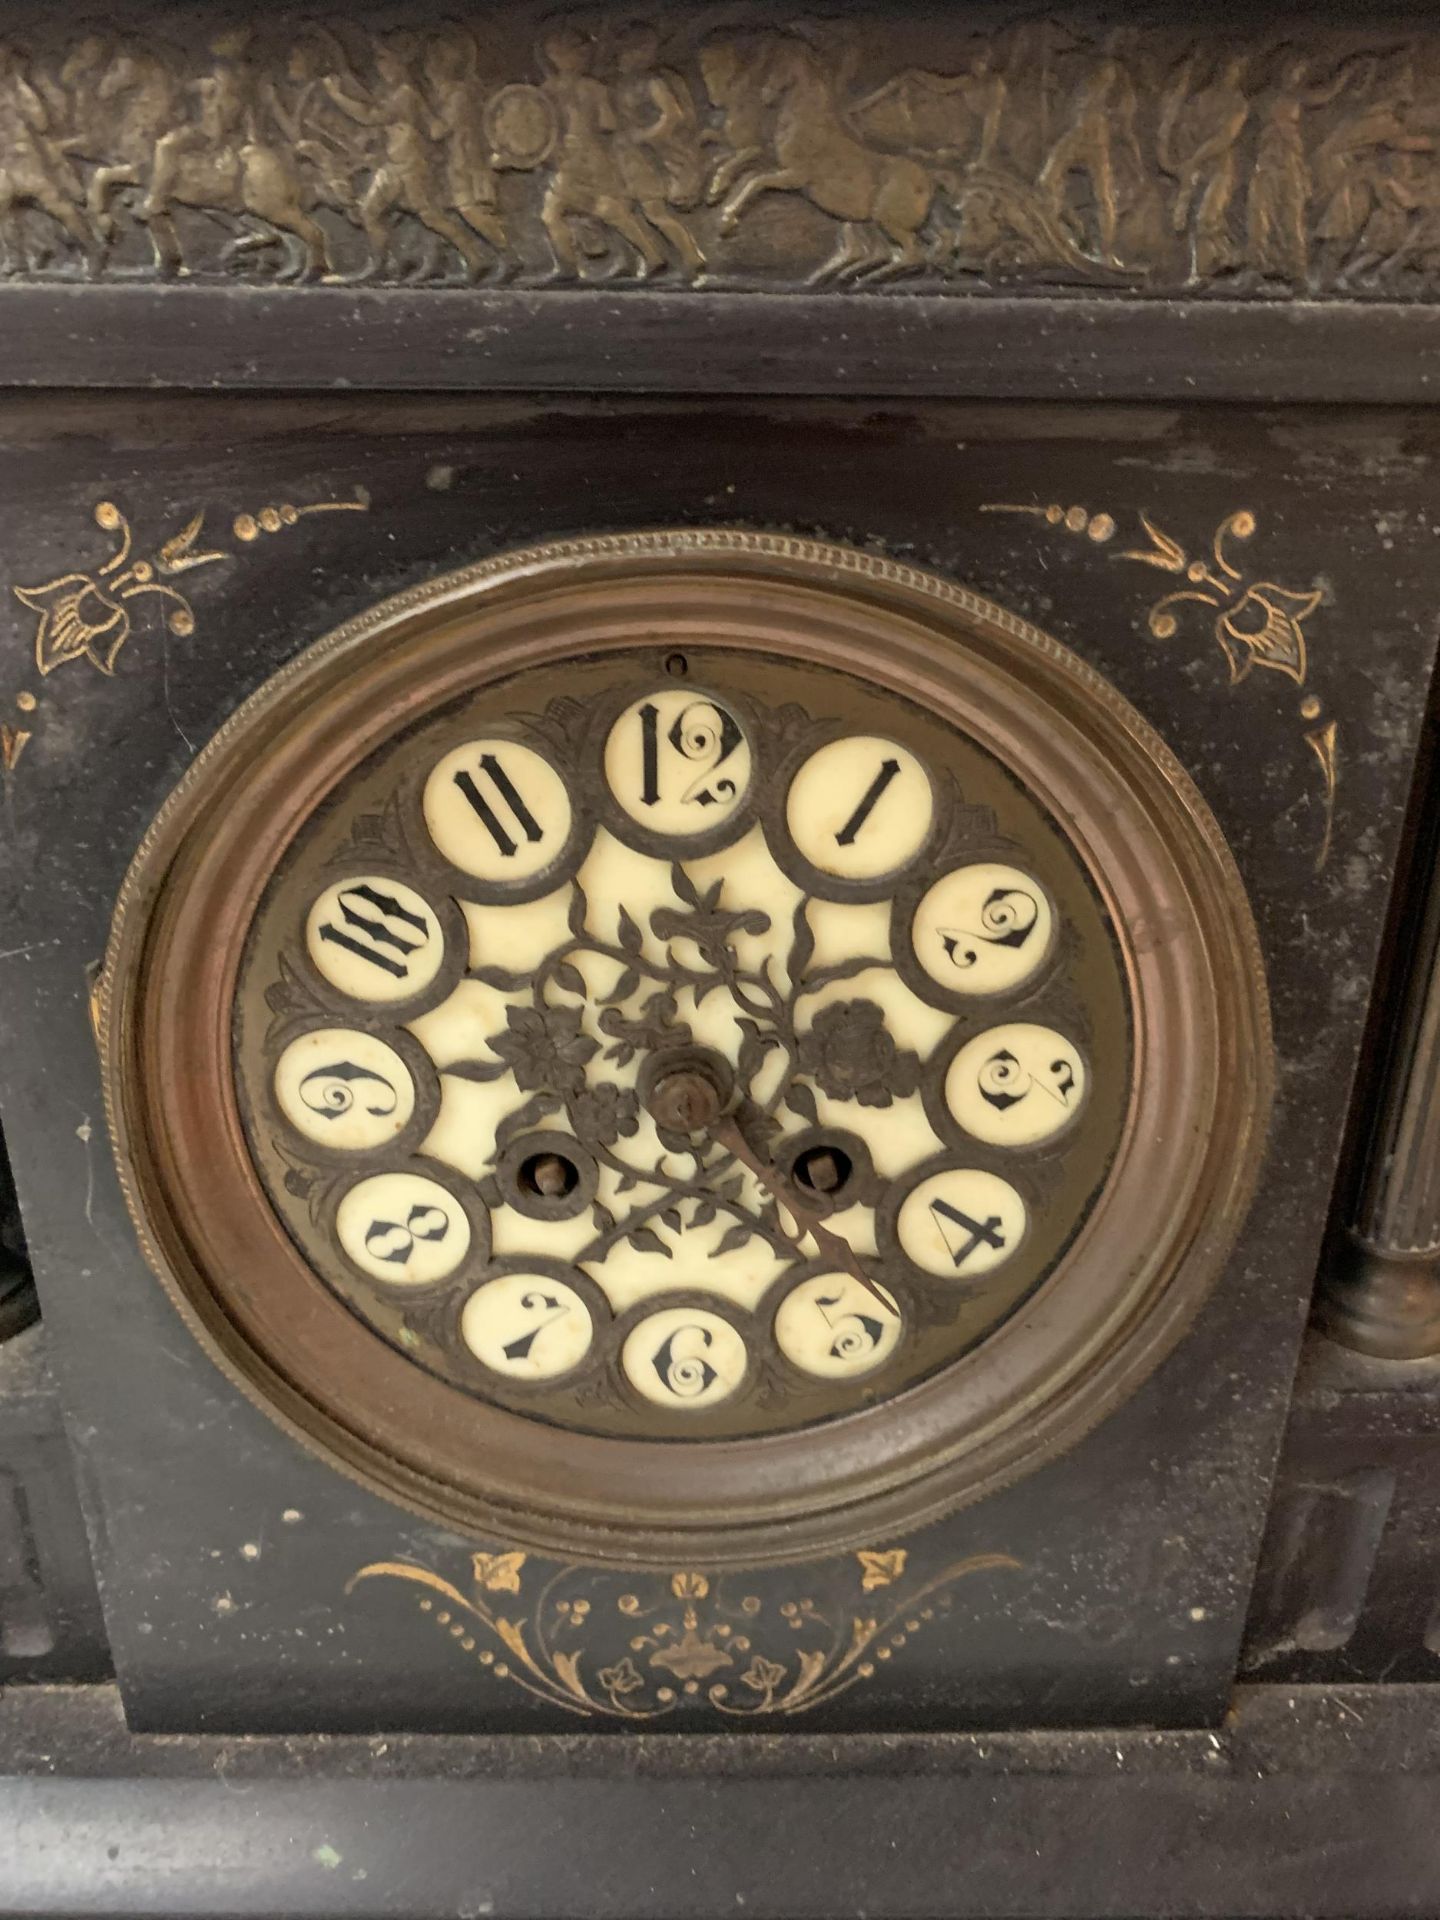 EARLY 1900'S SLATE FRAMED MANTLE CLOCK, 12CM DIAMETER CLOCK FACE WITH ARABIC NUMERALS, FLANKED BY - Image 2 of 6